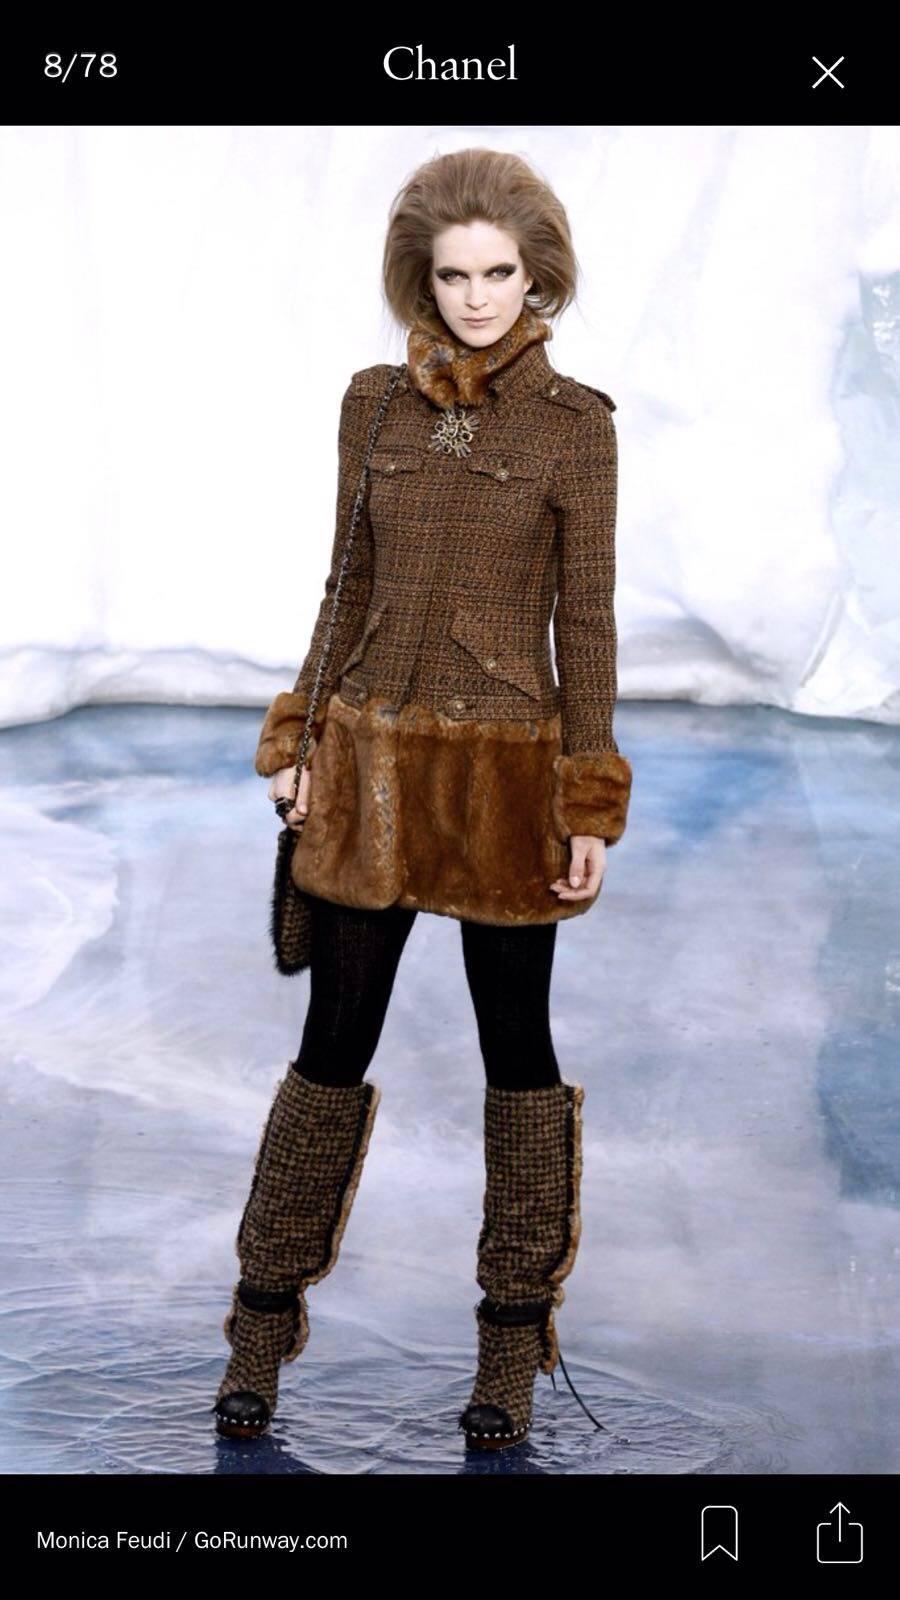 As seen on runway Chanel Coat in tweeed and fake fur from the Fall 2010 Runway.

Size 38 fench

Good condition but please notice that some small stones in the buttons has been lost ( see image number 3)

removable fur collar

Label Marked Smple